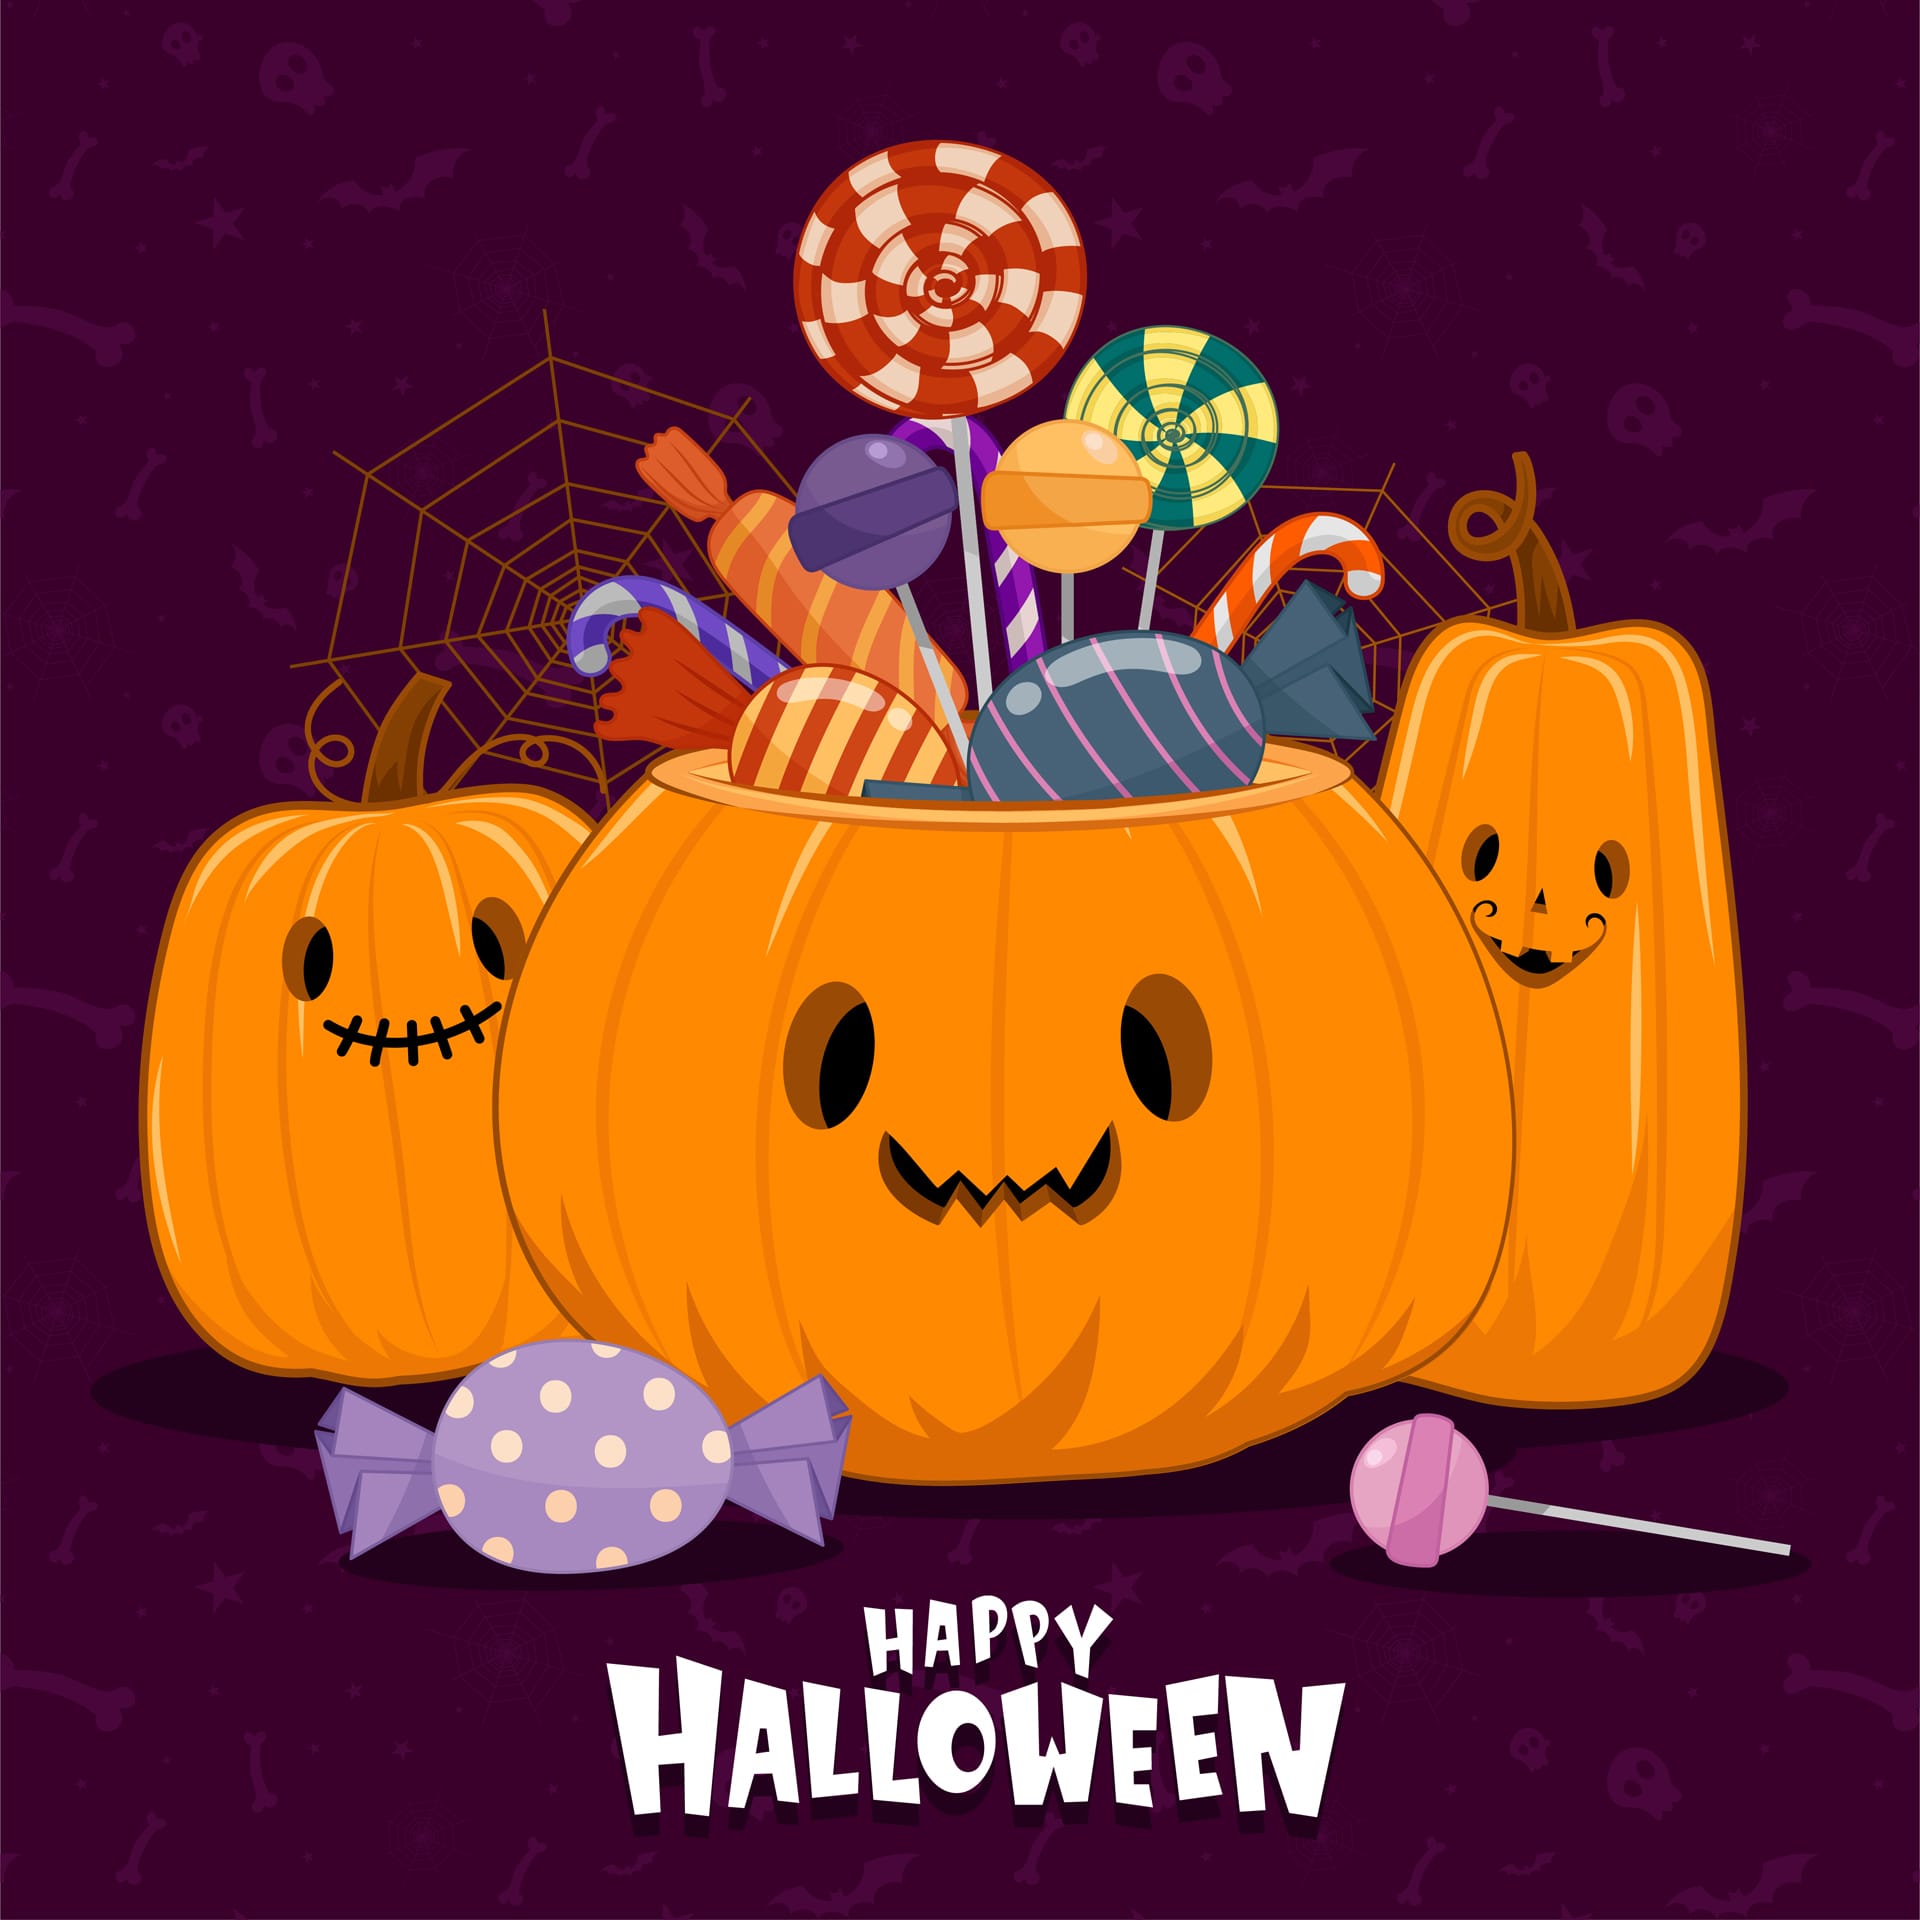 Halloween icons with pumpkins multicolored candies